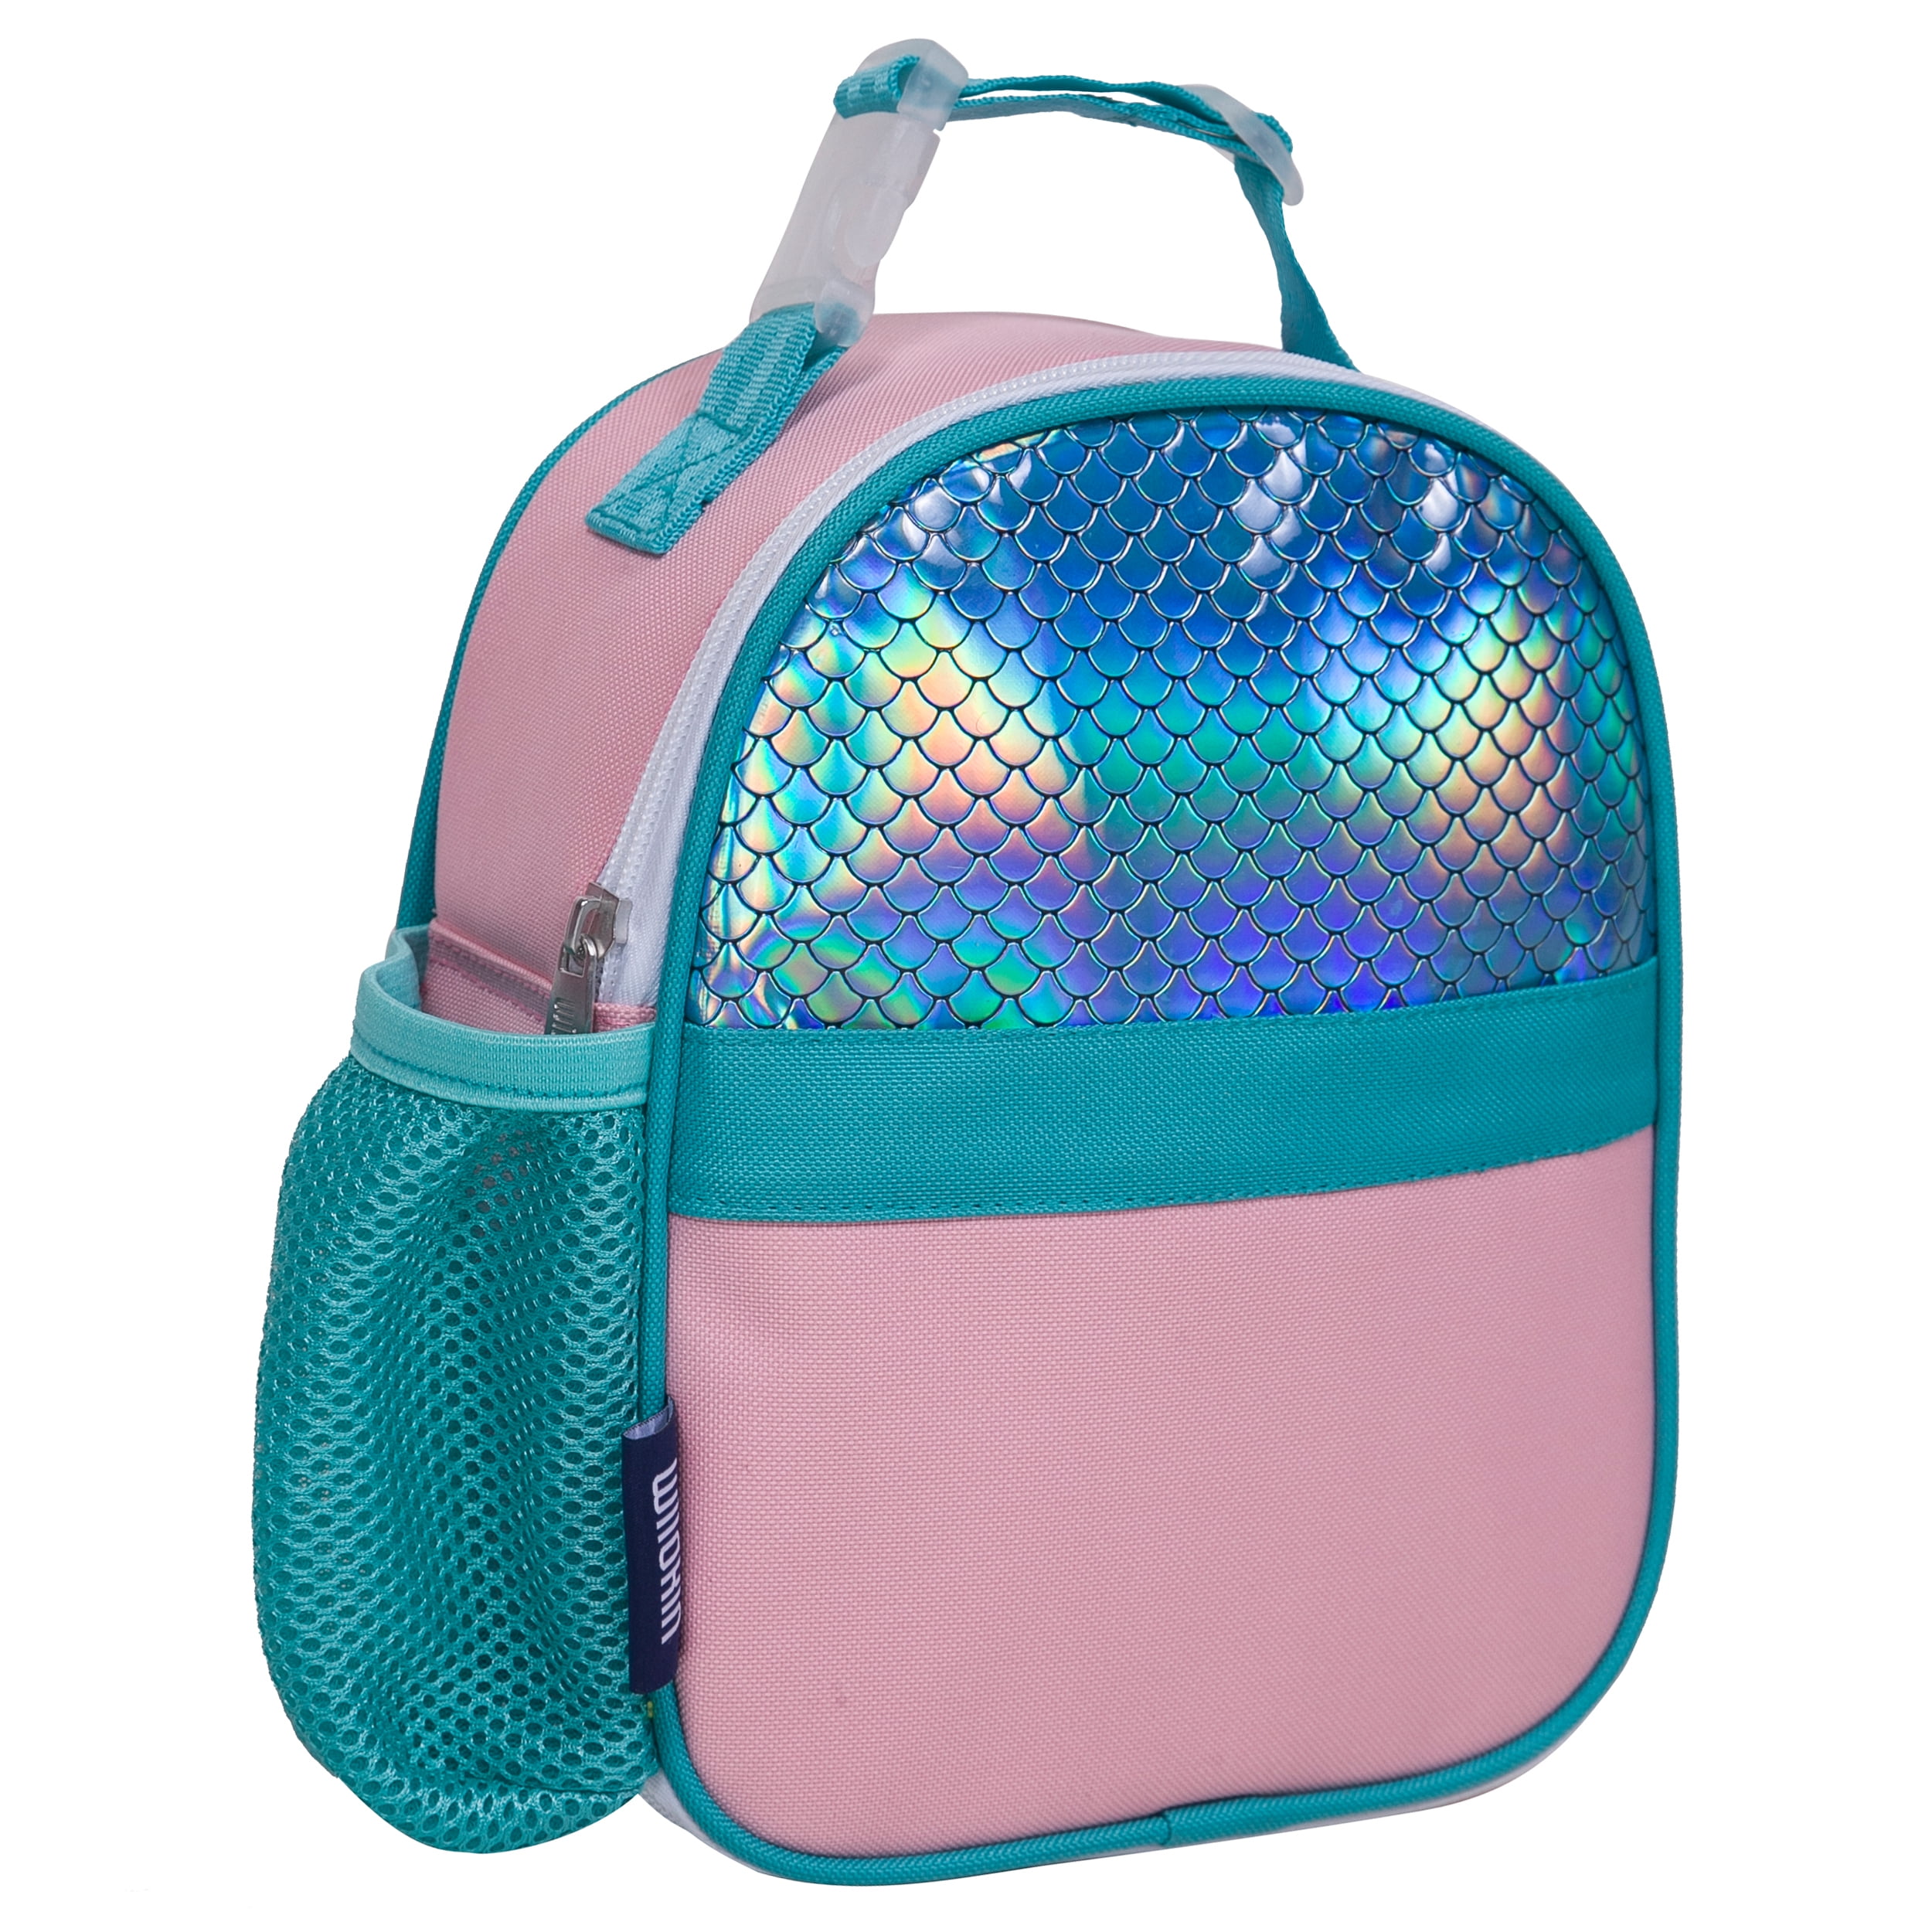 Kids Lunch Box for Girls and Boys Toddler Insulated Lunch Bag (Mermaid  Tail1)